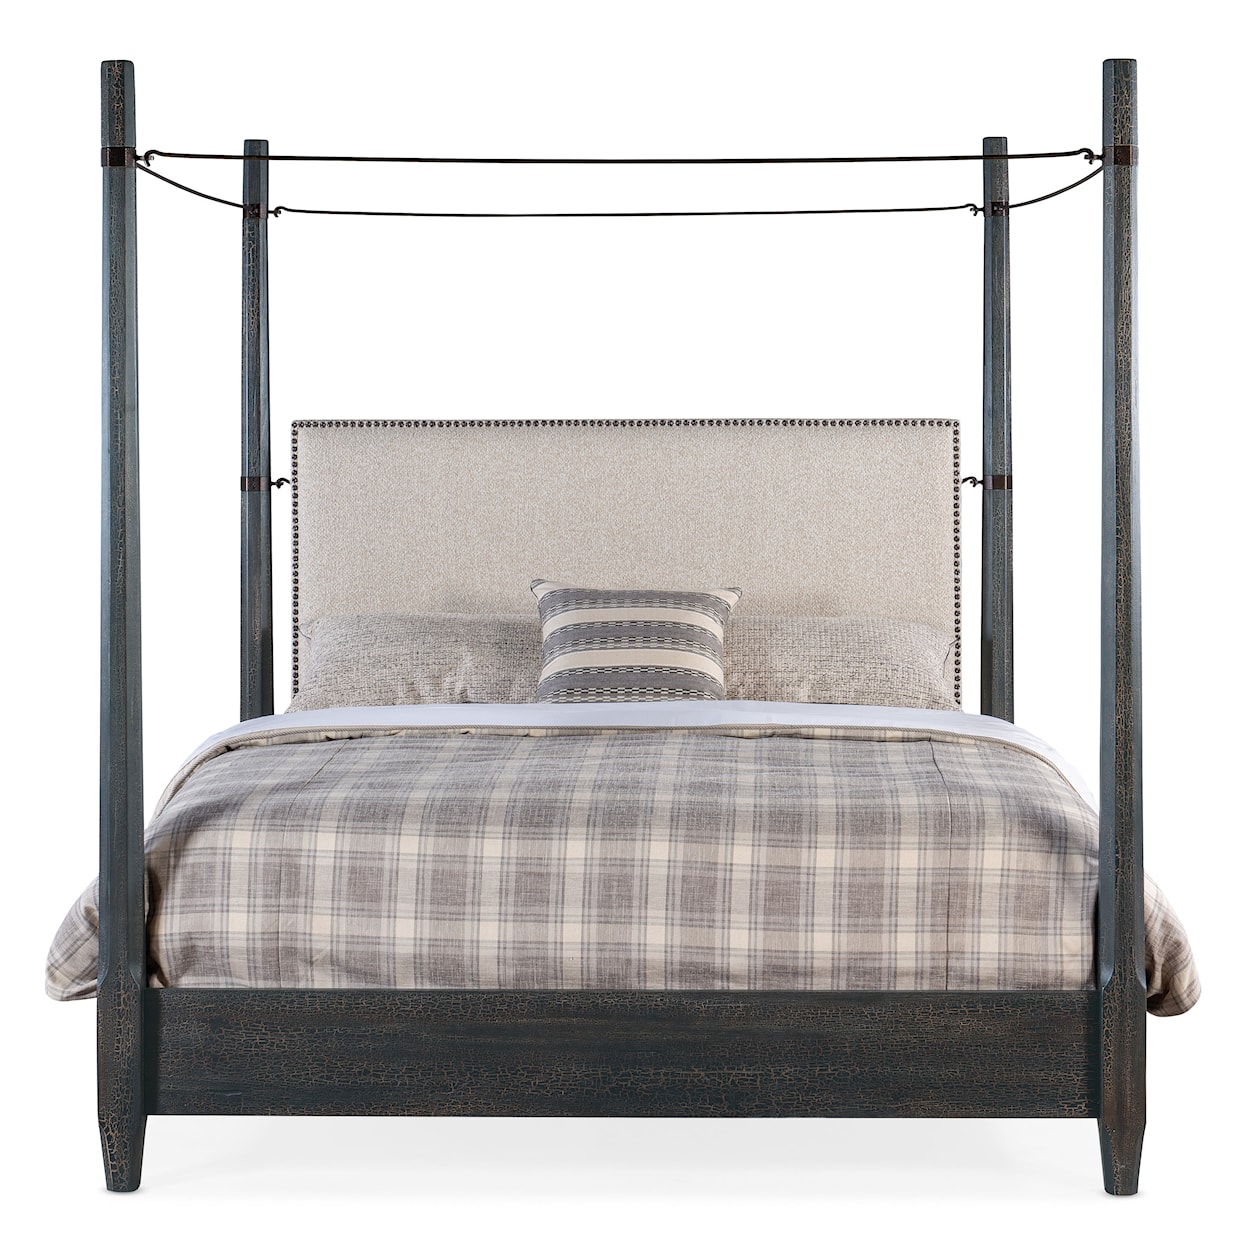 Hooker Furniture Big Sky California King Poster Bed with Canopy